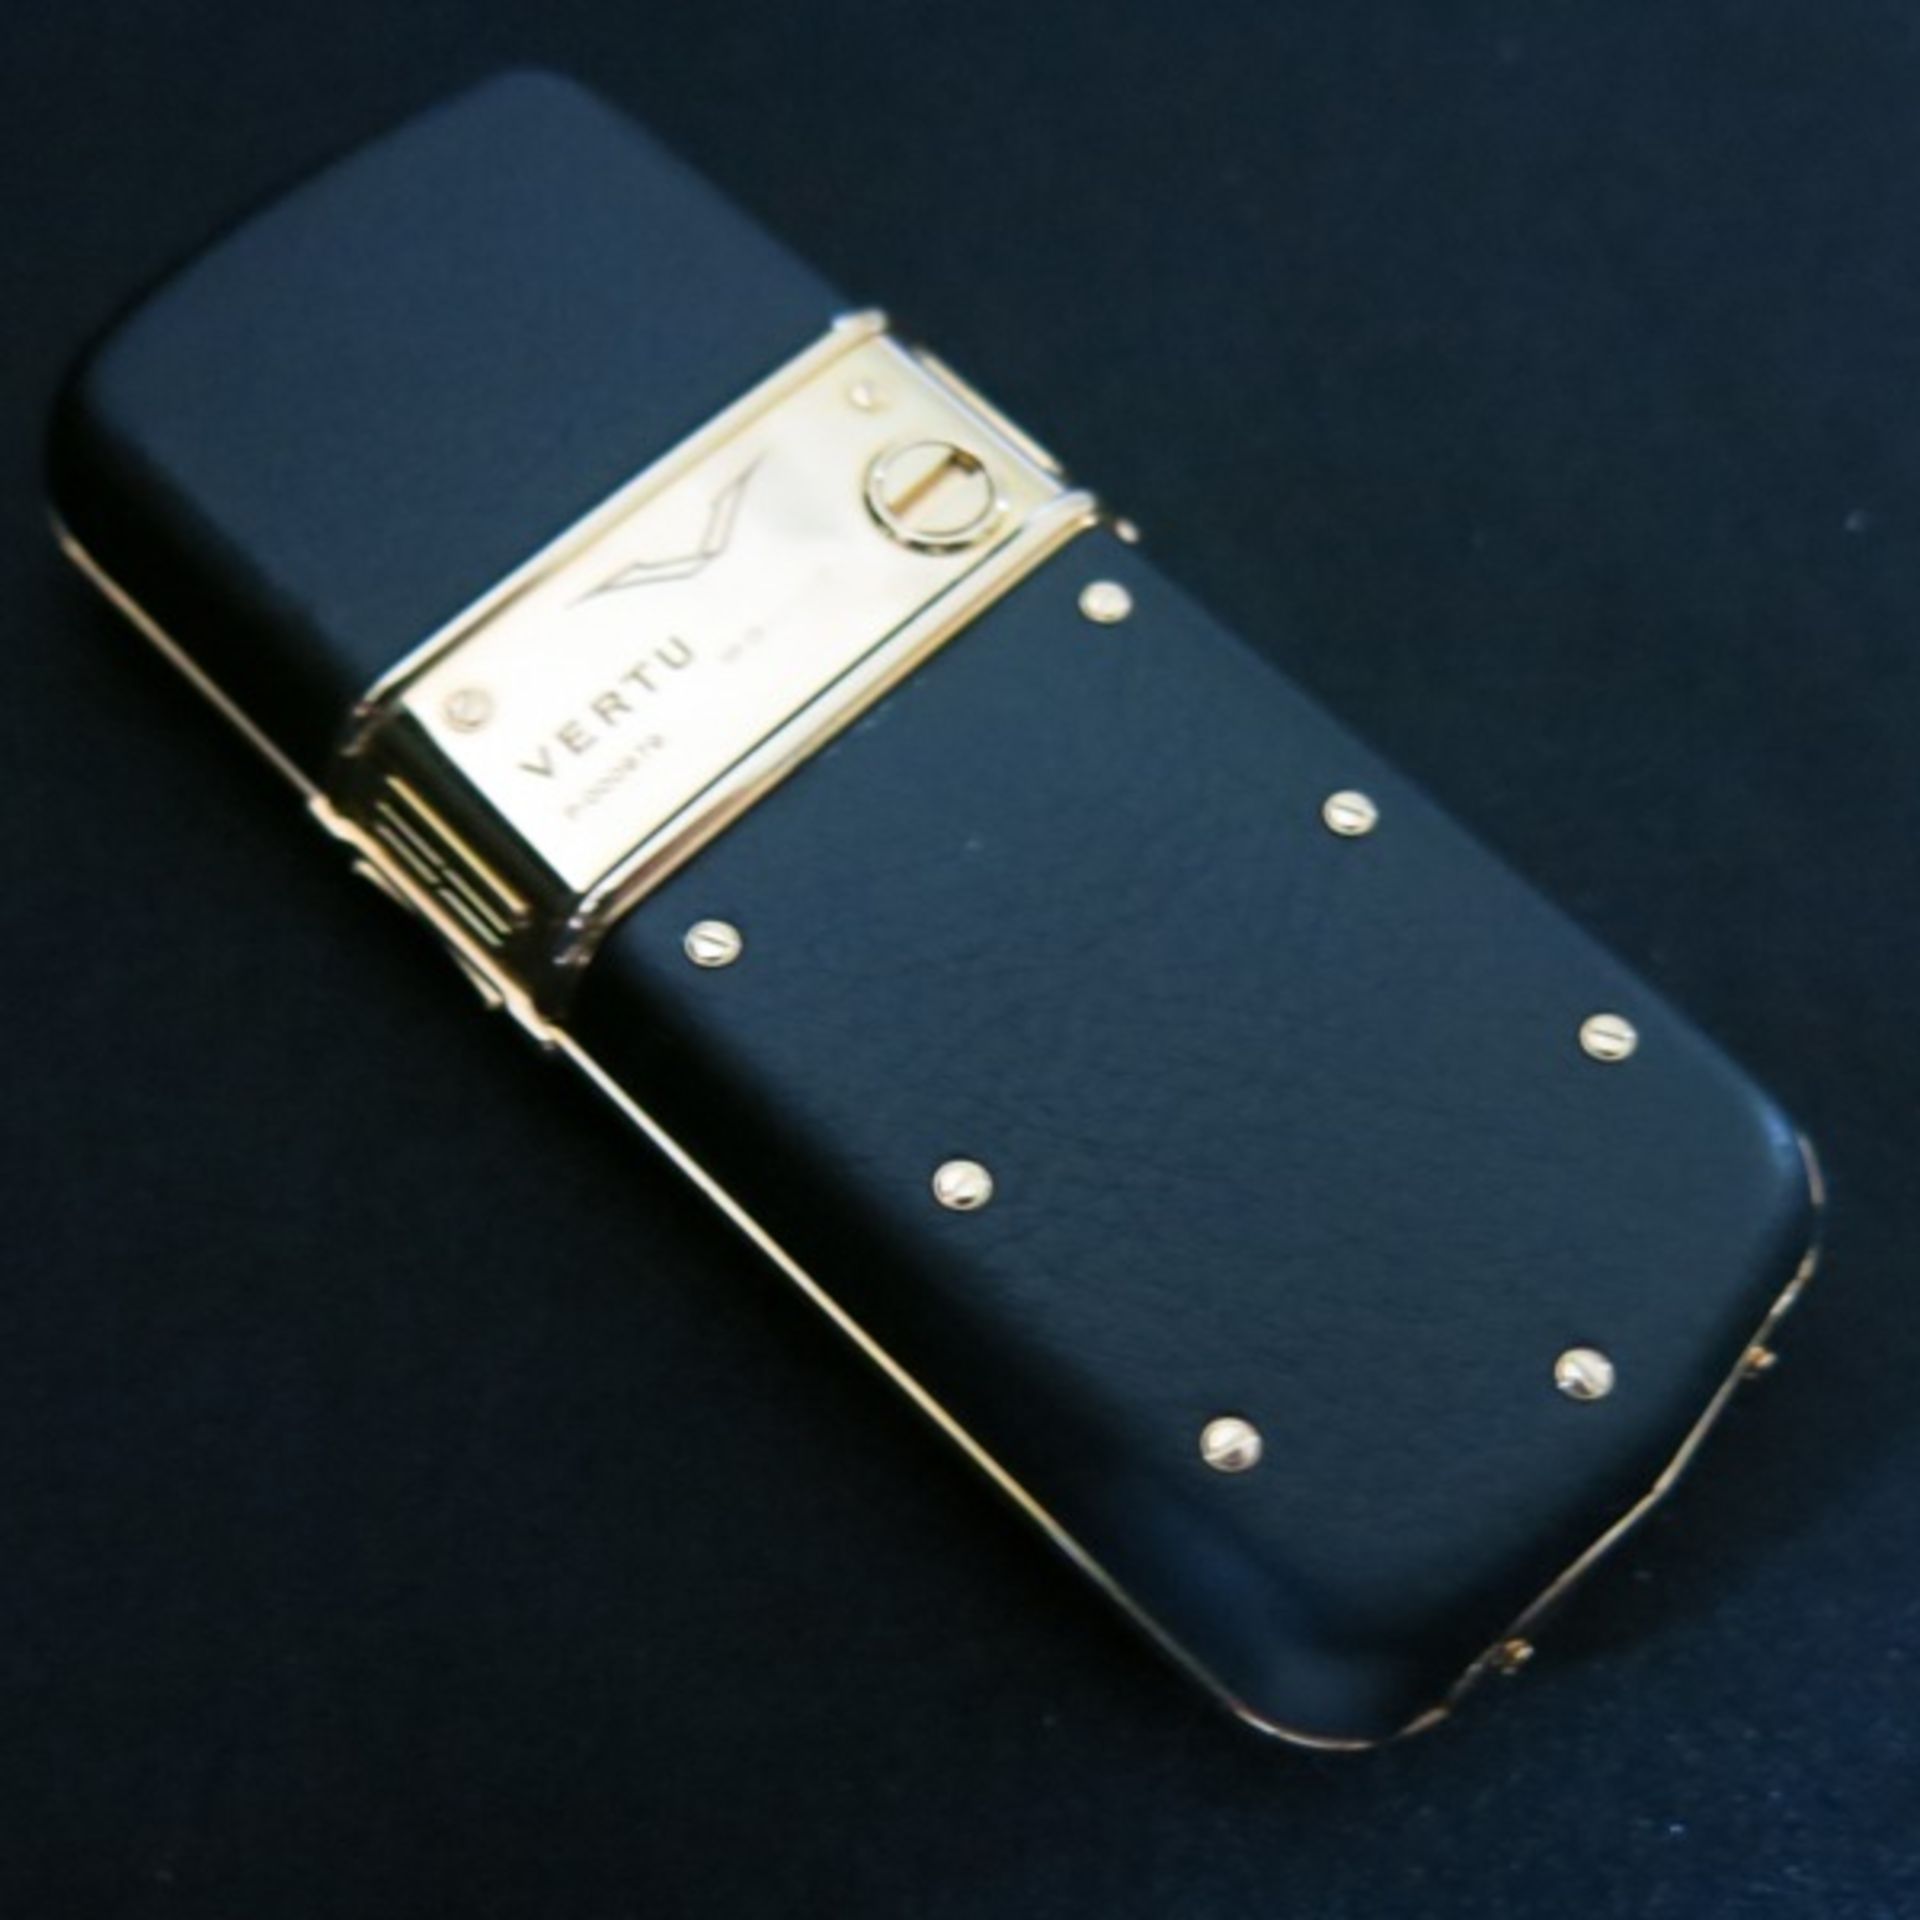 Vertu Constellation Classic with 18kt Yellow Gold Bezel, Back Plate, Select Key & Quarter Turn. - Image 2 of 6